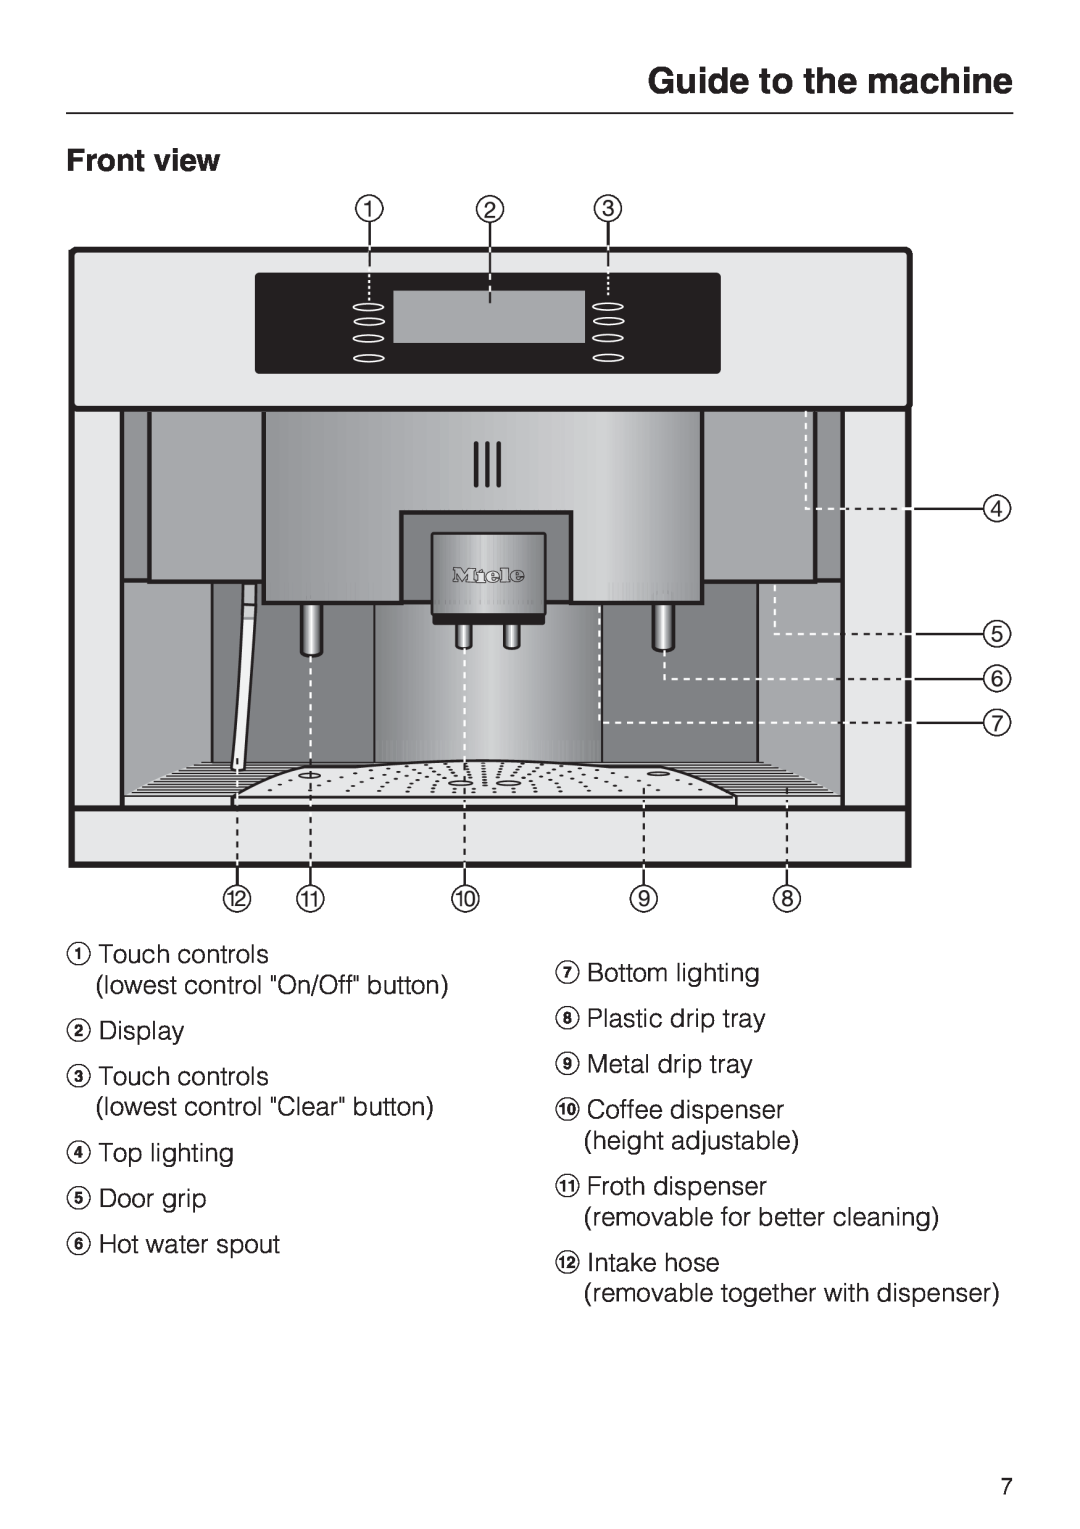 Miele CVA 4070 installation instructions Guide to the machine, Front view 